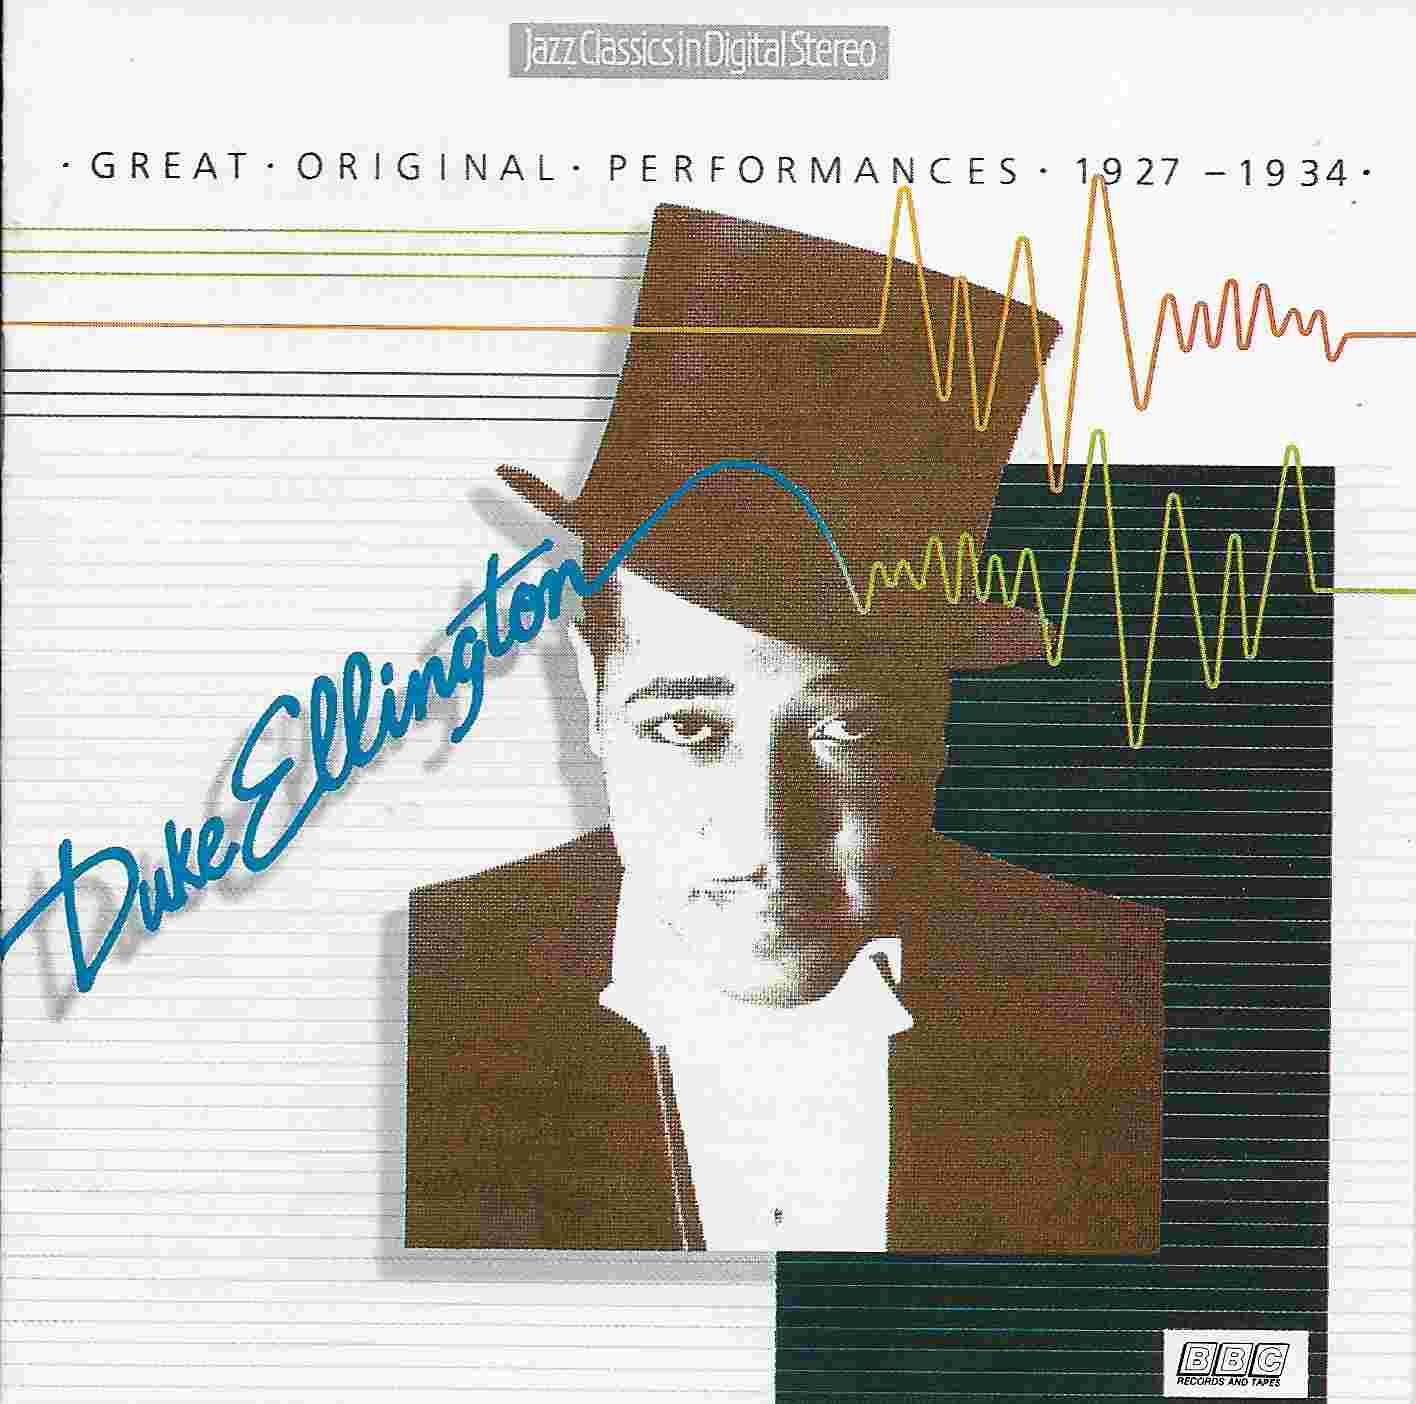 Picture of BBCCD643 Jazz classics - Duke Ellington by artist Duke Ellington from the BBC cds - Records and Tapes library